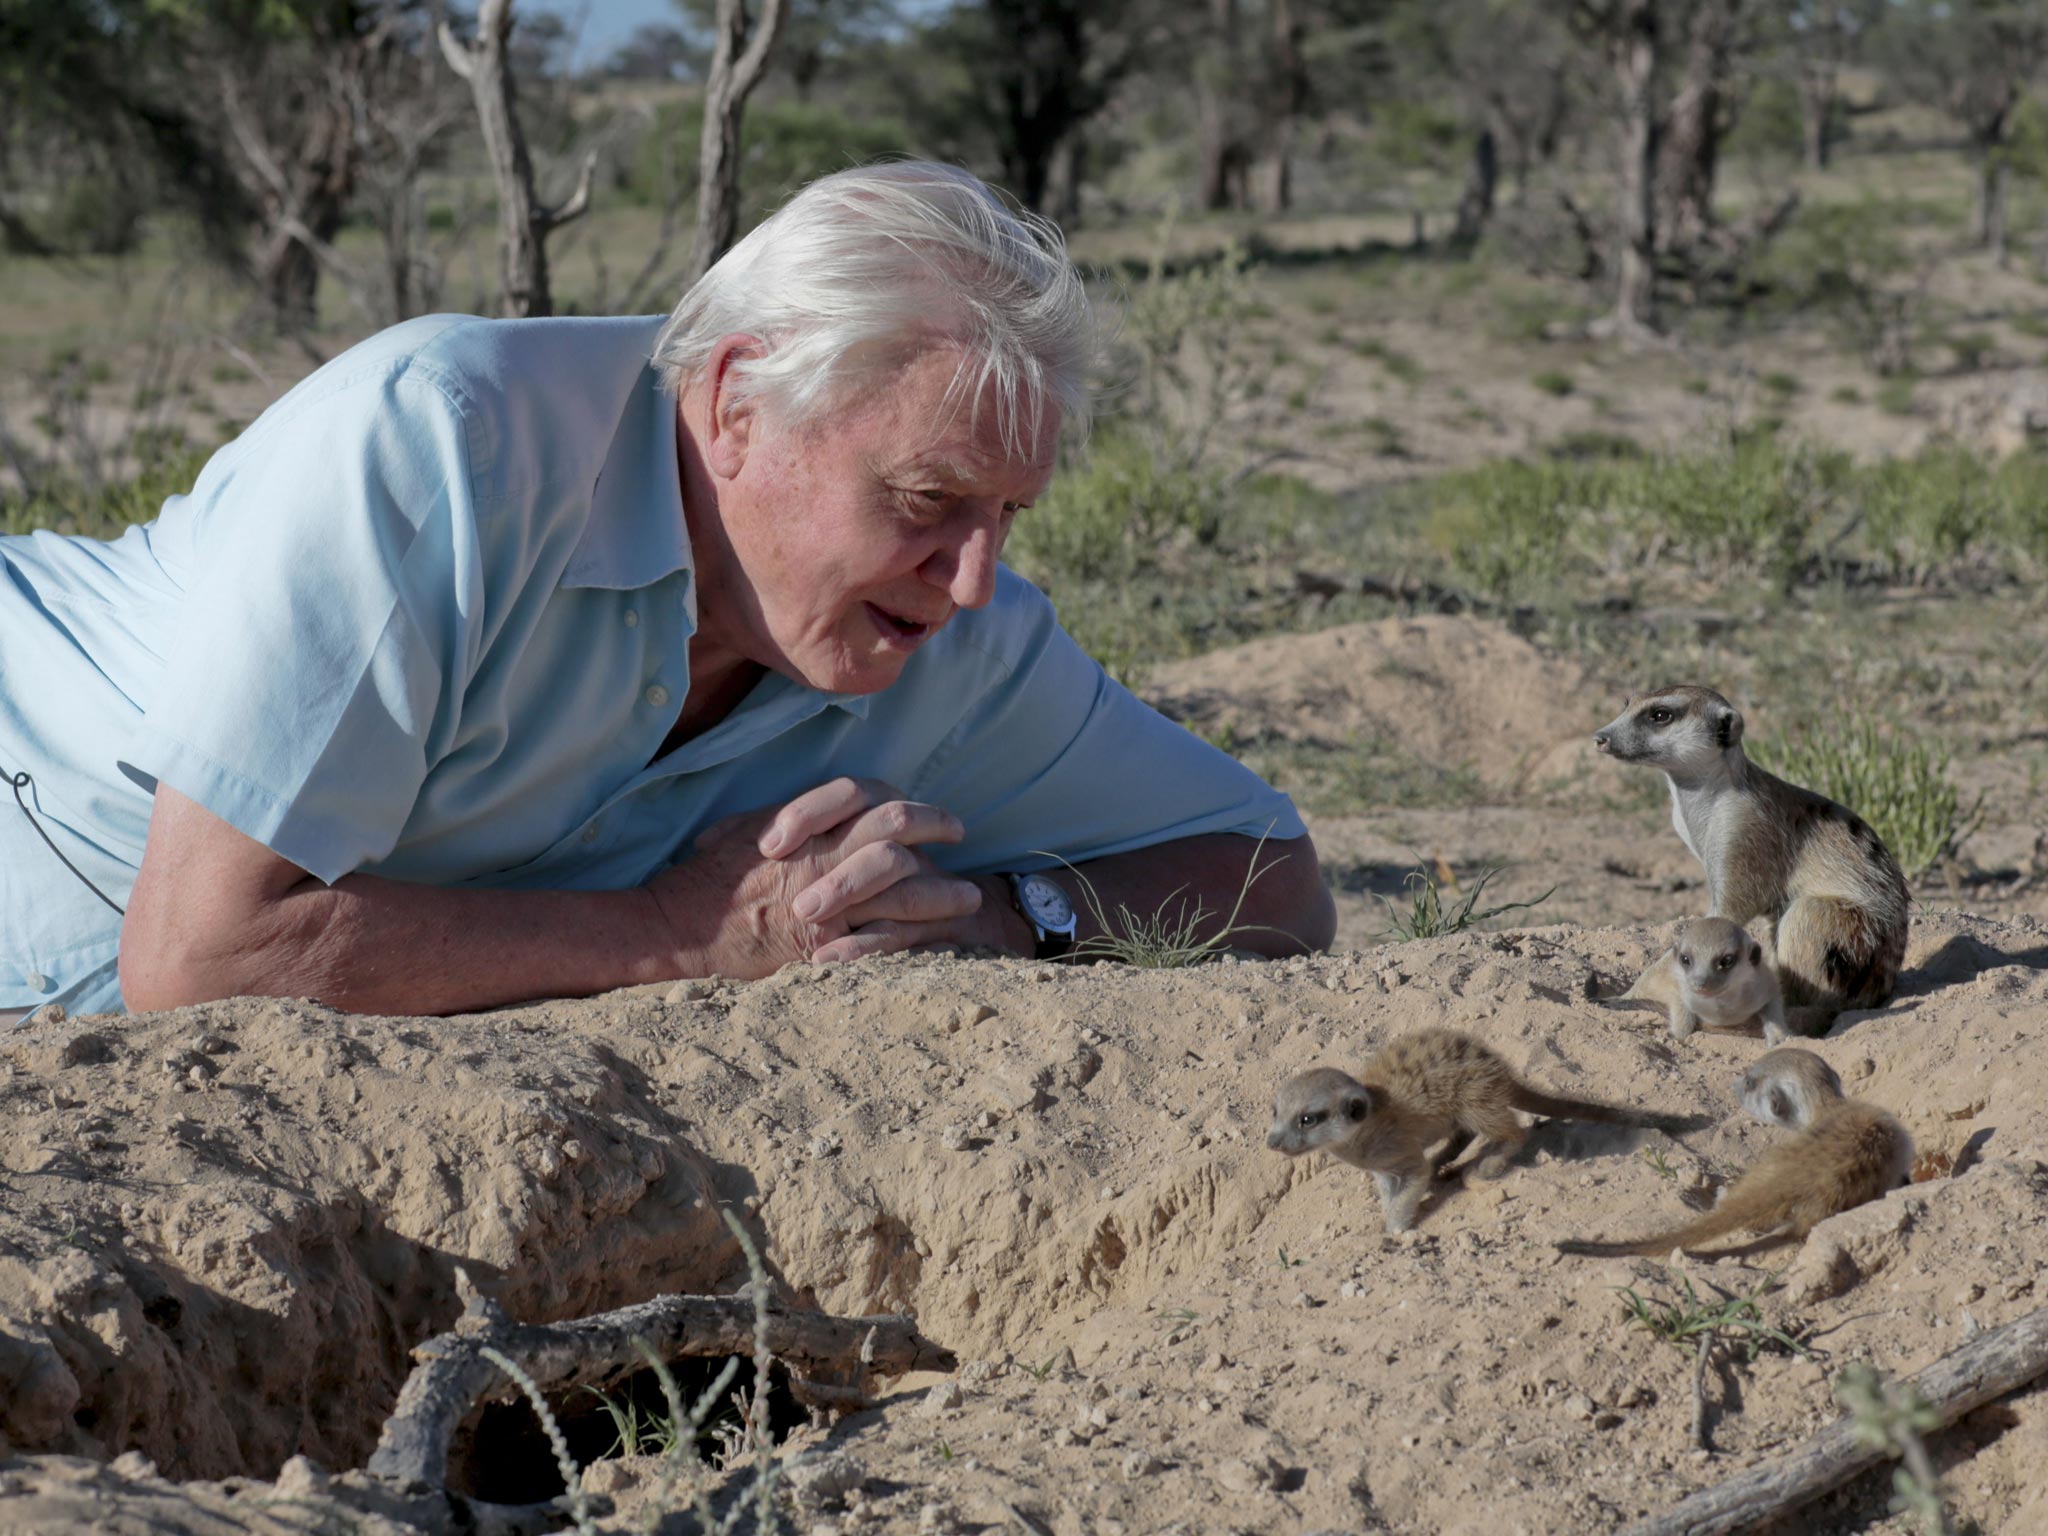 Creature comforts: David Attenborough makes friends with meerkats in ‘Life Story’